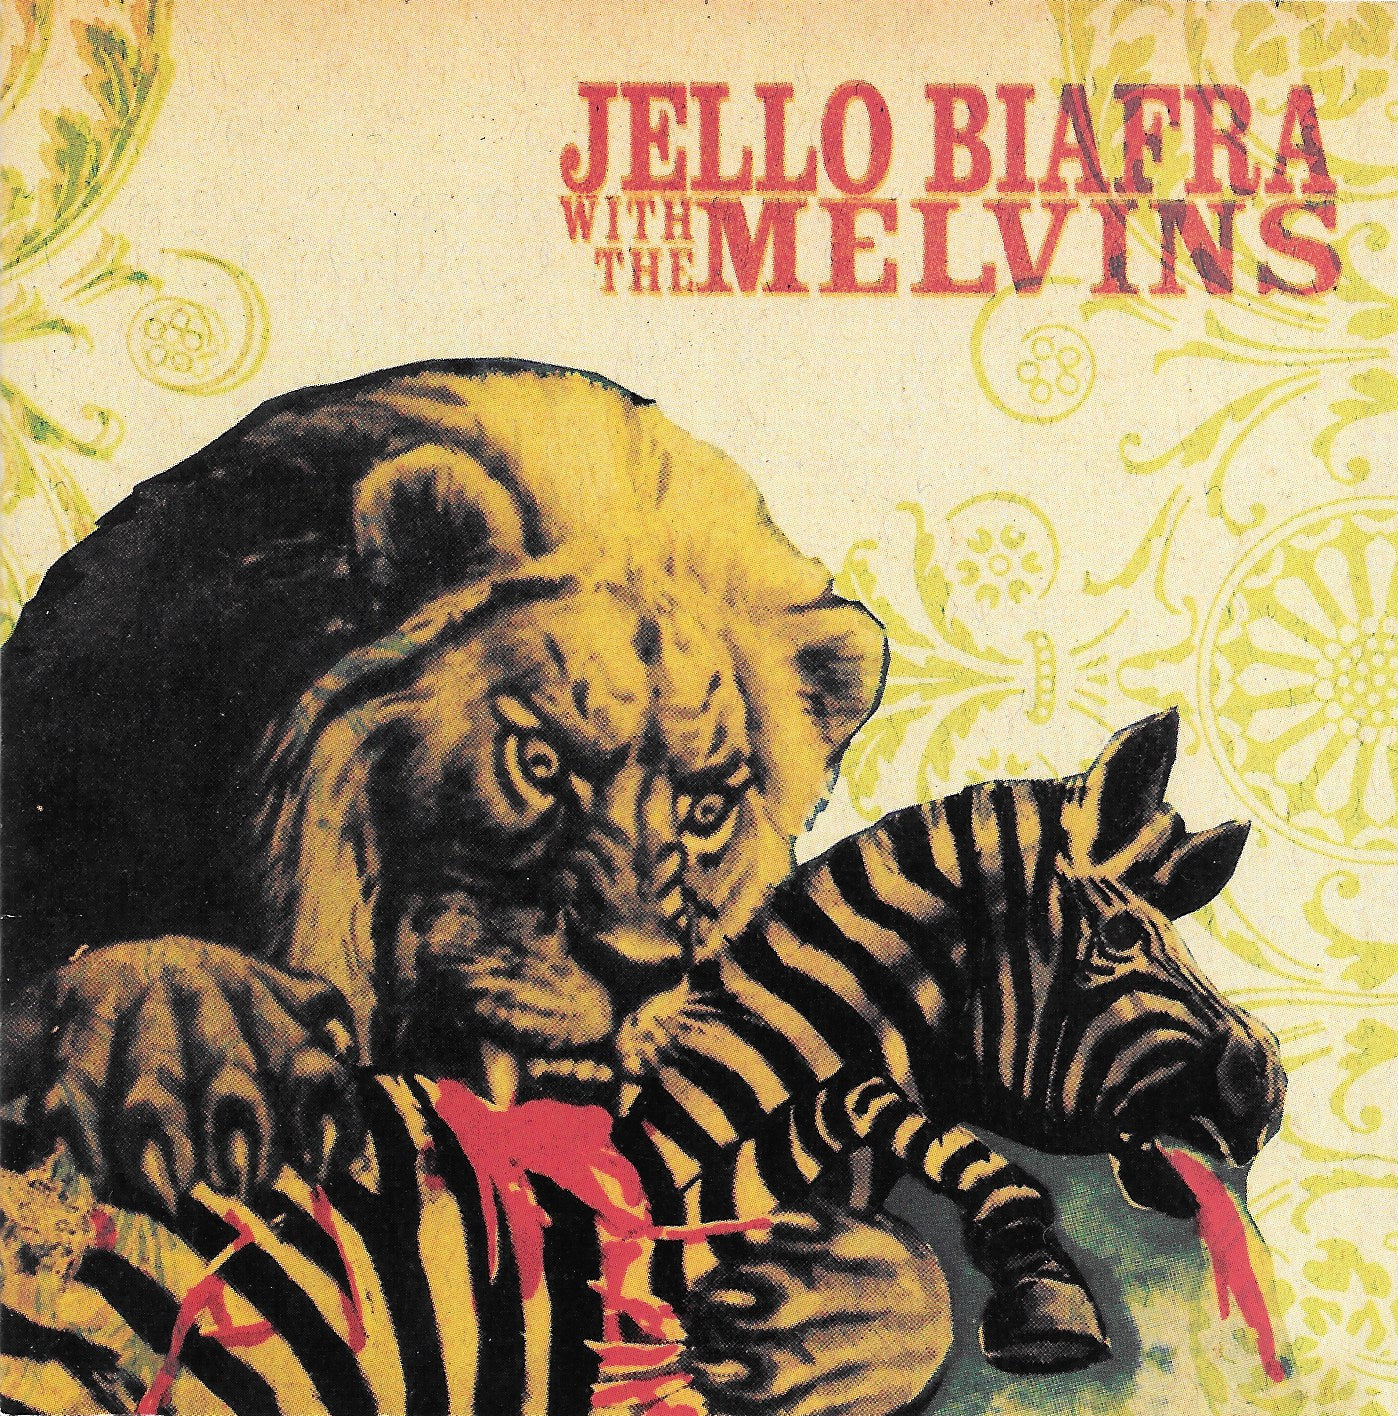 v300 - Jello Biafra With The Melvins - "Never Breathe What You Can't See"